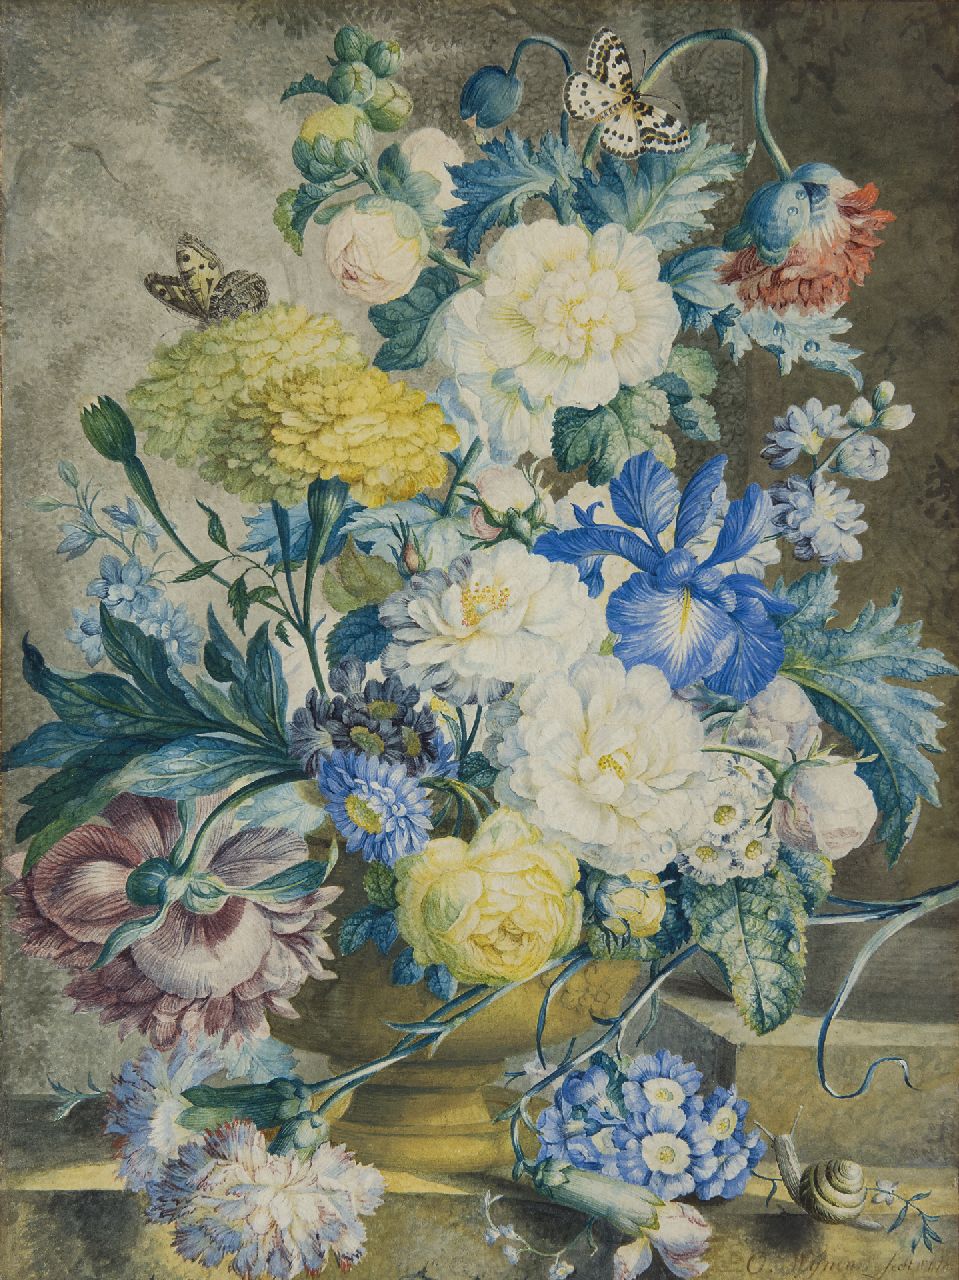 Wijnen O.  | Oswald Wijnen | Watercolours and drawings offered for sale | A flower still life, watercolour on paper 40.6 x 30.1 cm, signed l.r. and dated 1778